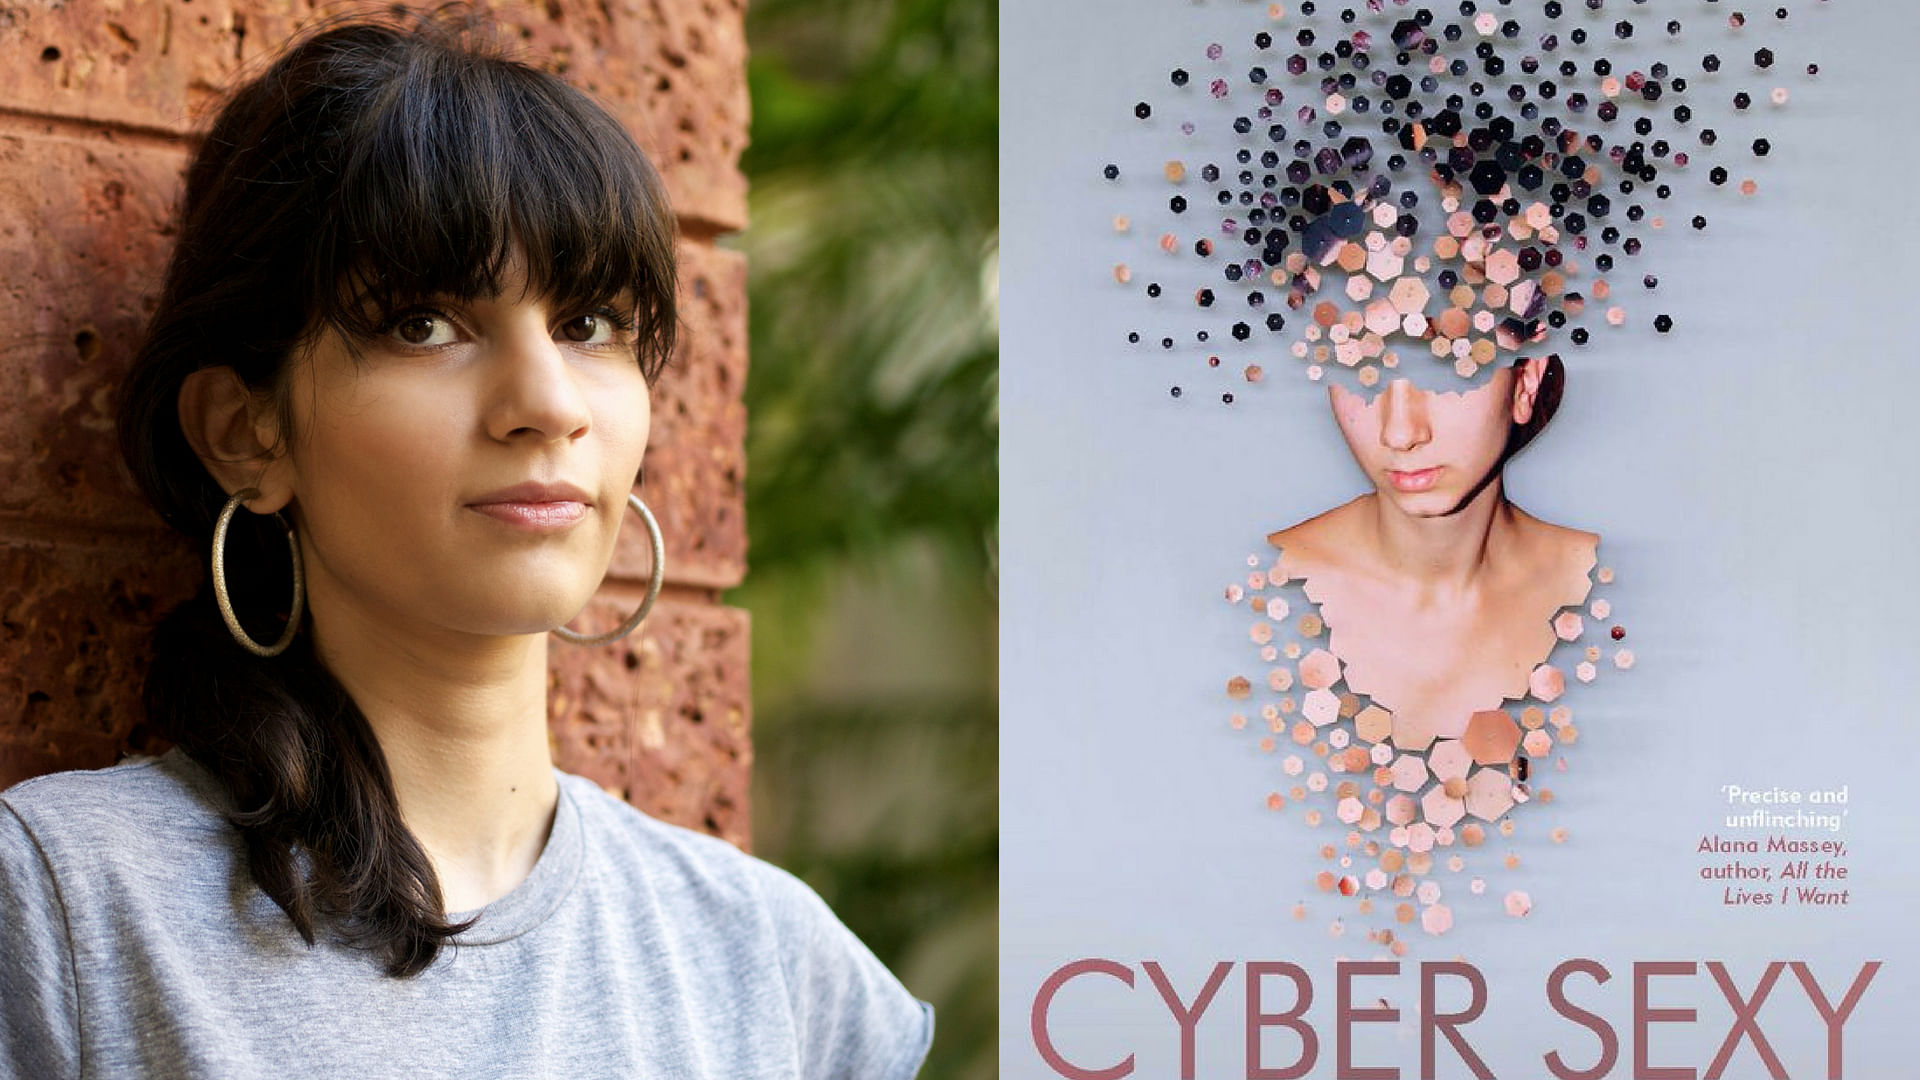 Richa Kaul Padte’s ‘Cyber Sexy’ is an essential primer for anyone who’s looking for sex education.